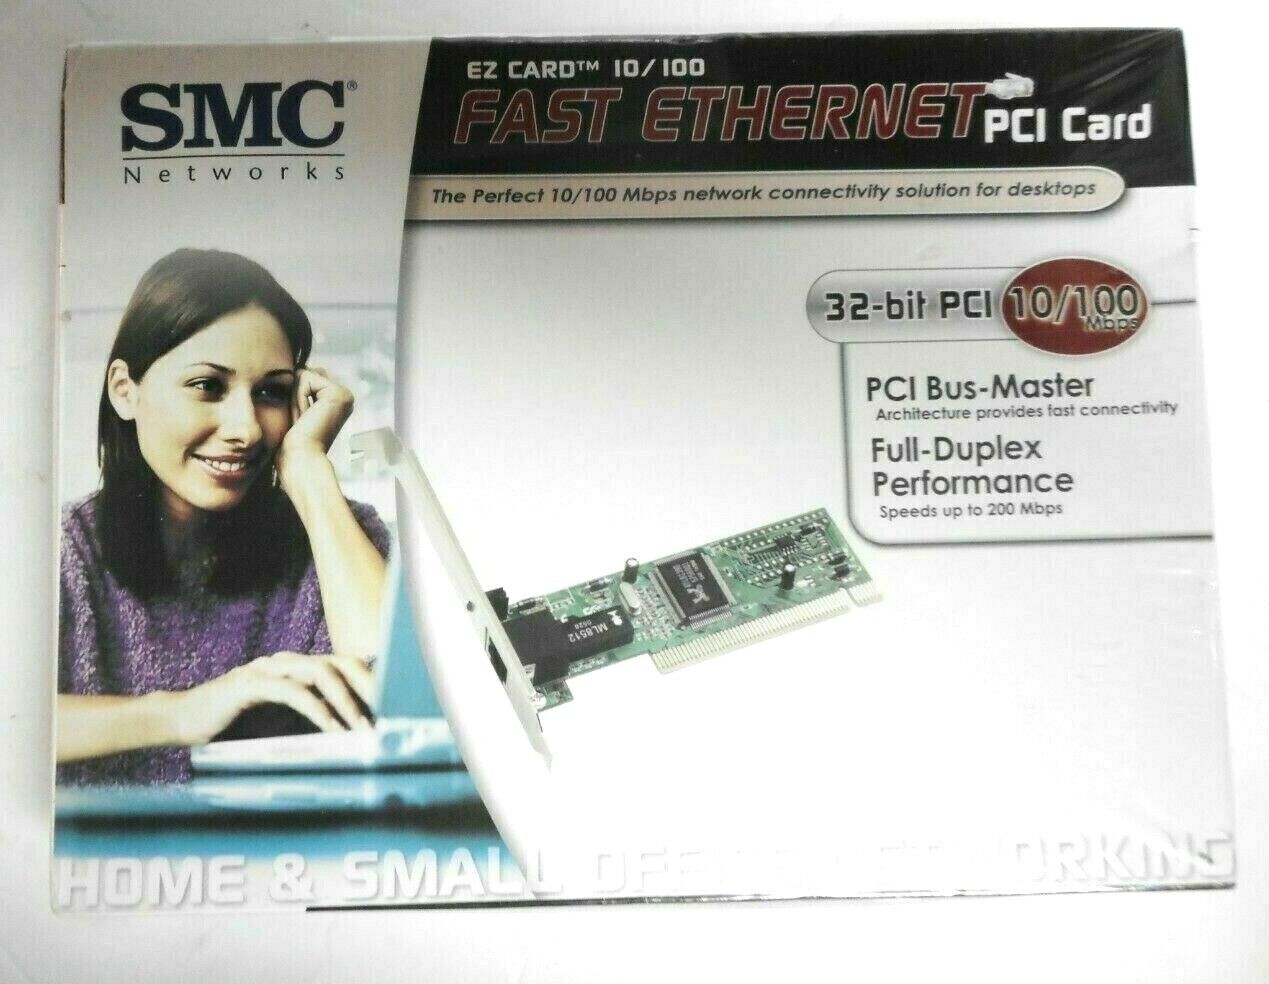 SMC NETWORKS FAST ETHERNET PCI CARD EZ 10/100 Mbps NEW Still in packaging